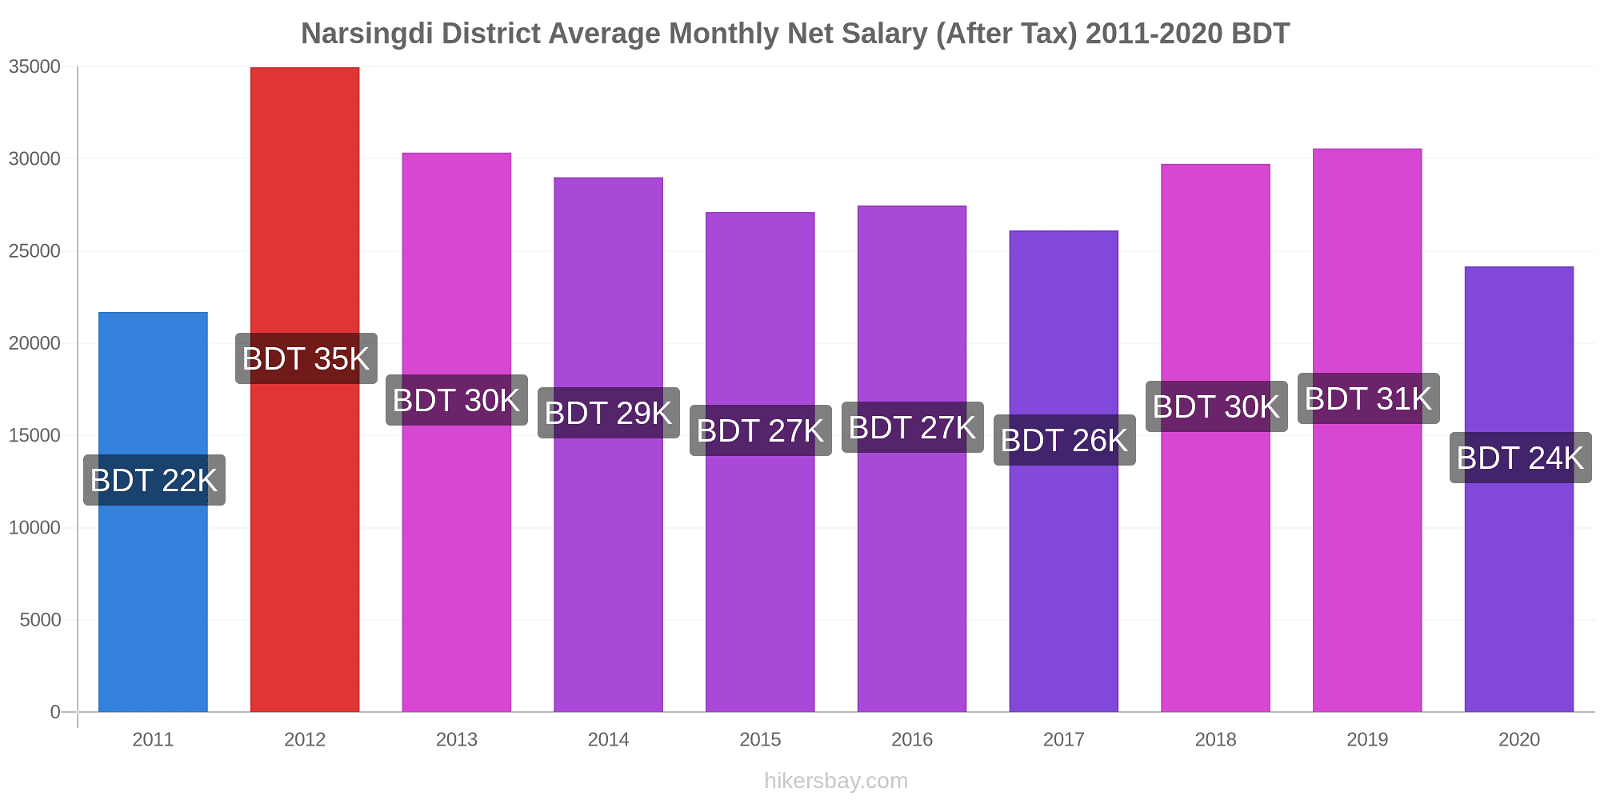 Narsingdi District price changes Average Monthly Net Salary (After Tax) hikersbay.com